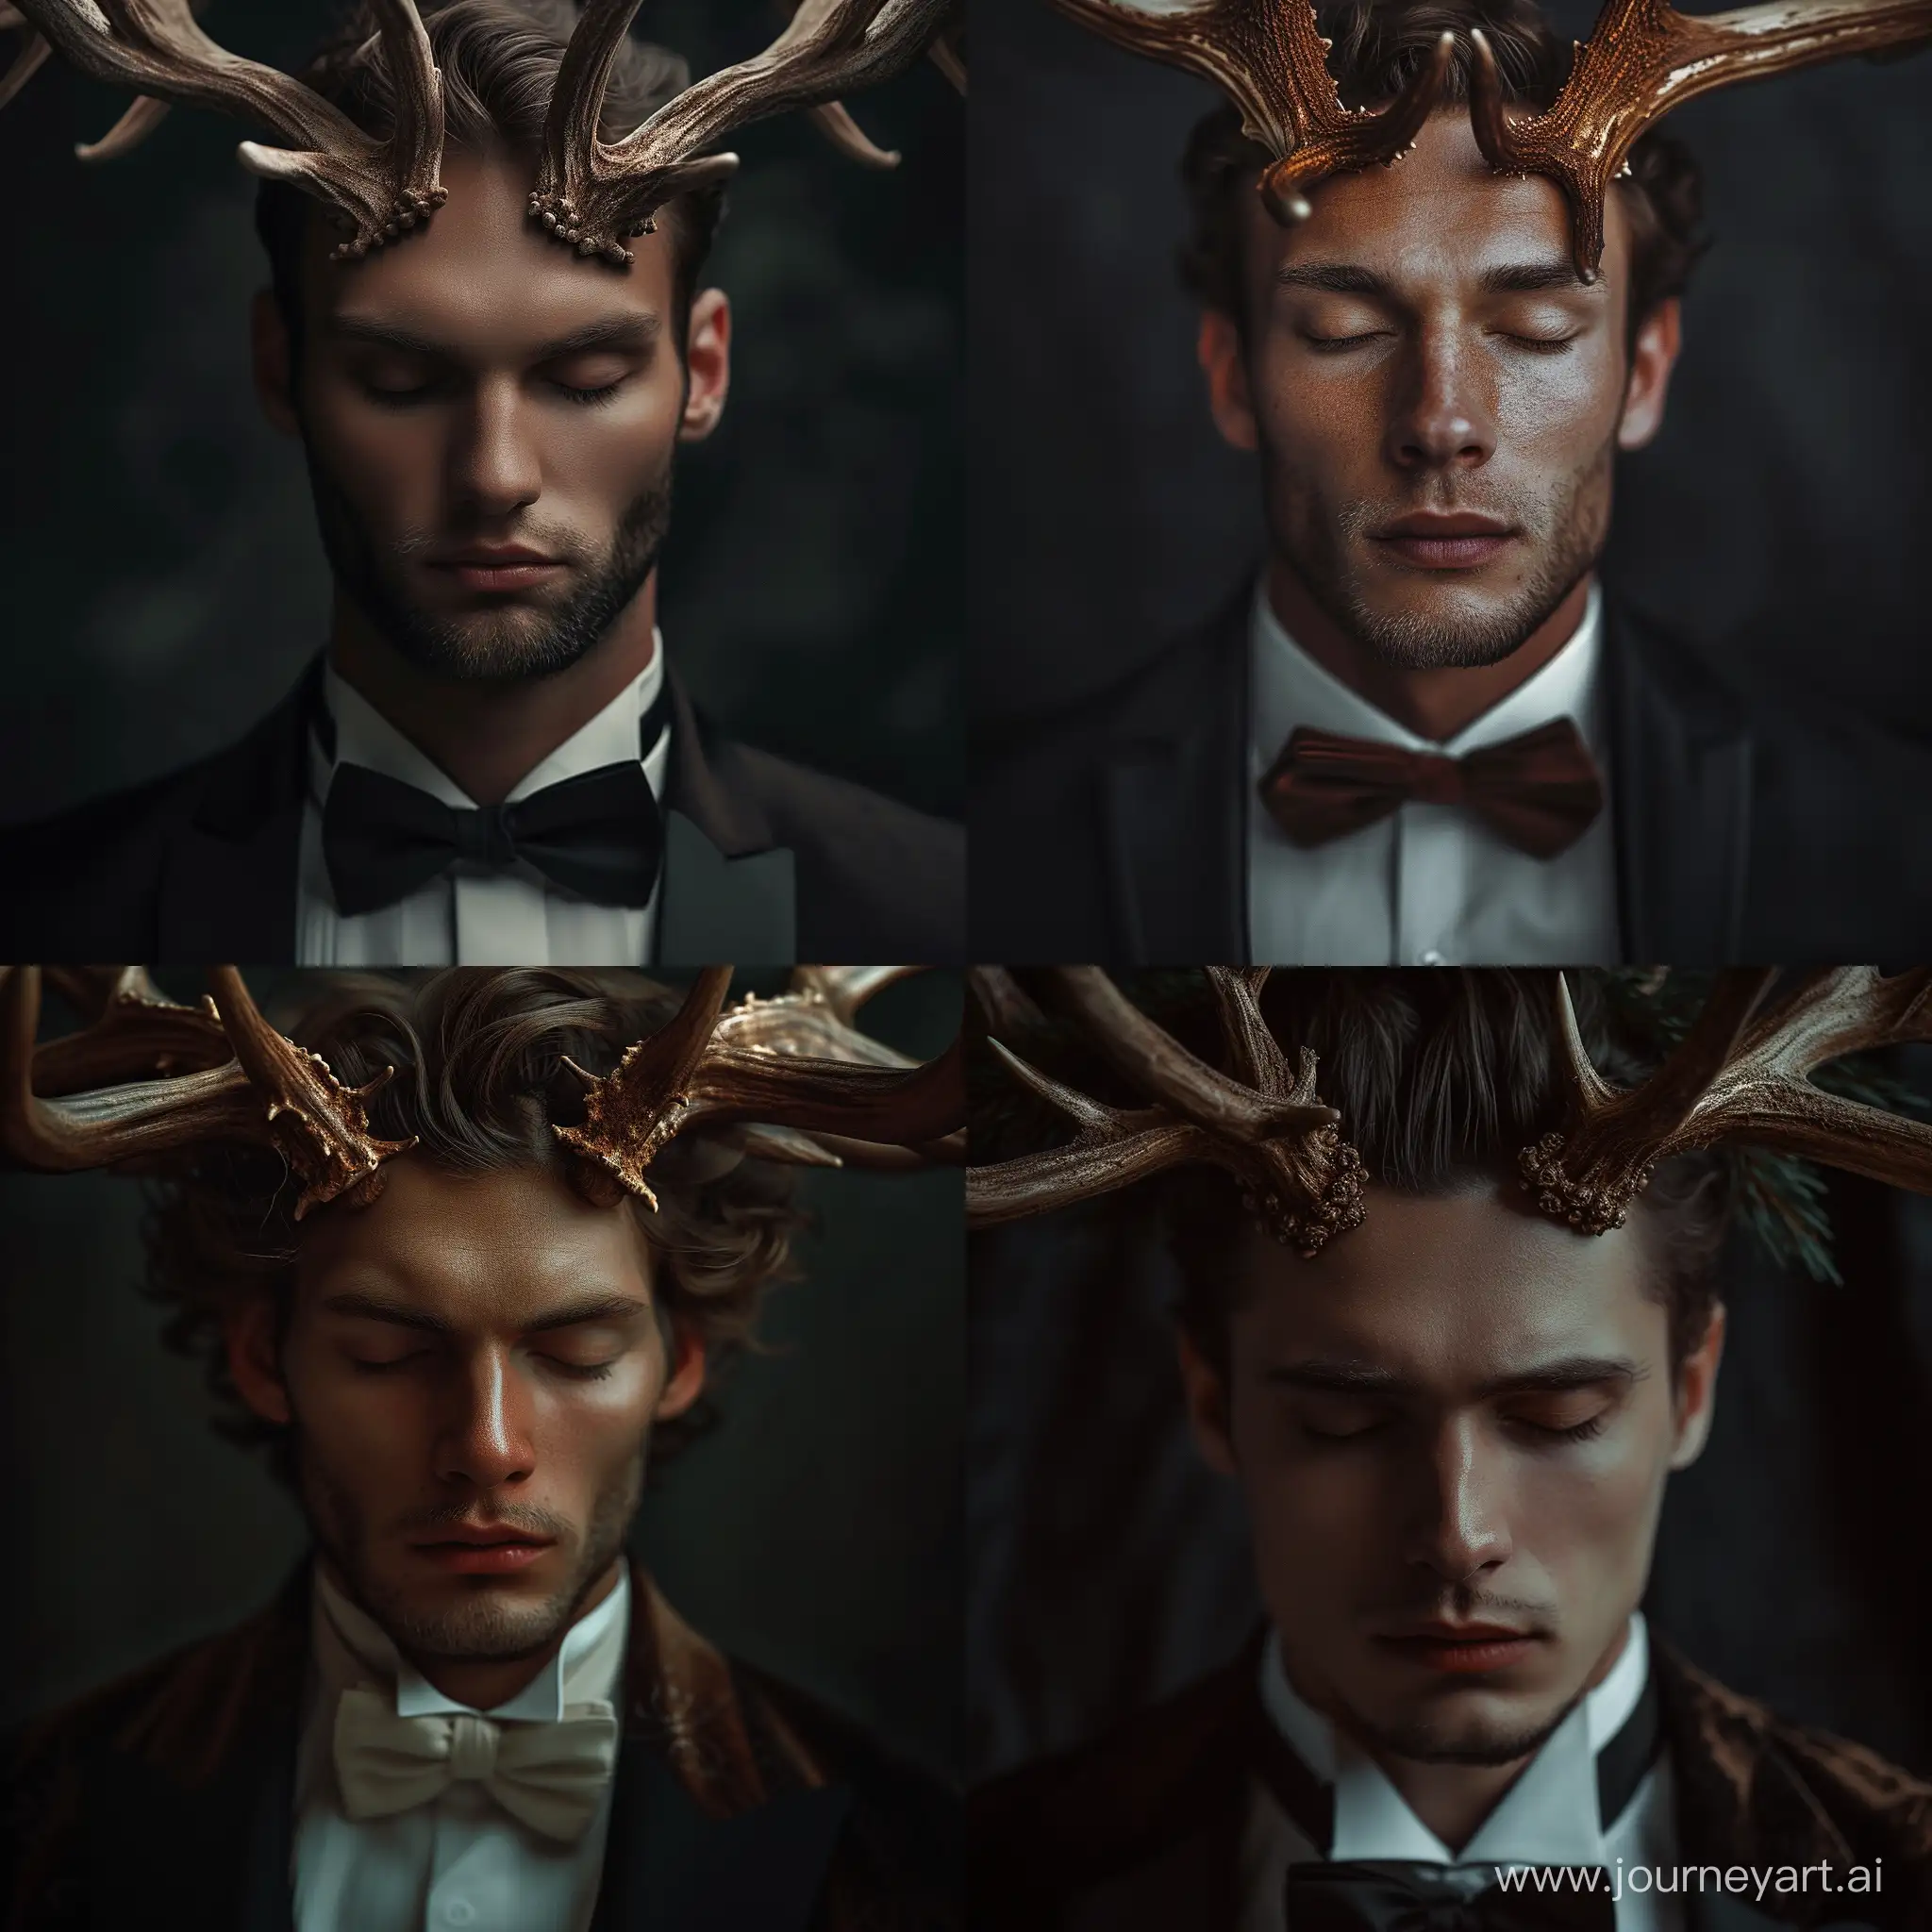 Close up photo of a man with deer antlers. Wearing luxury tuxedo. Handsome and creepy. His eyes are closed. Dark background. Realistic image